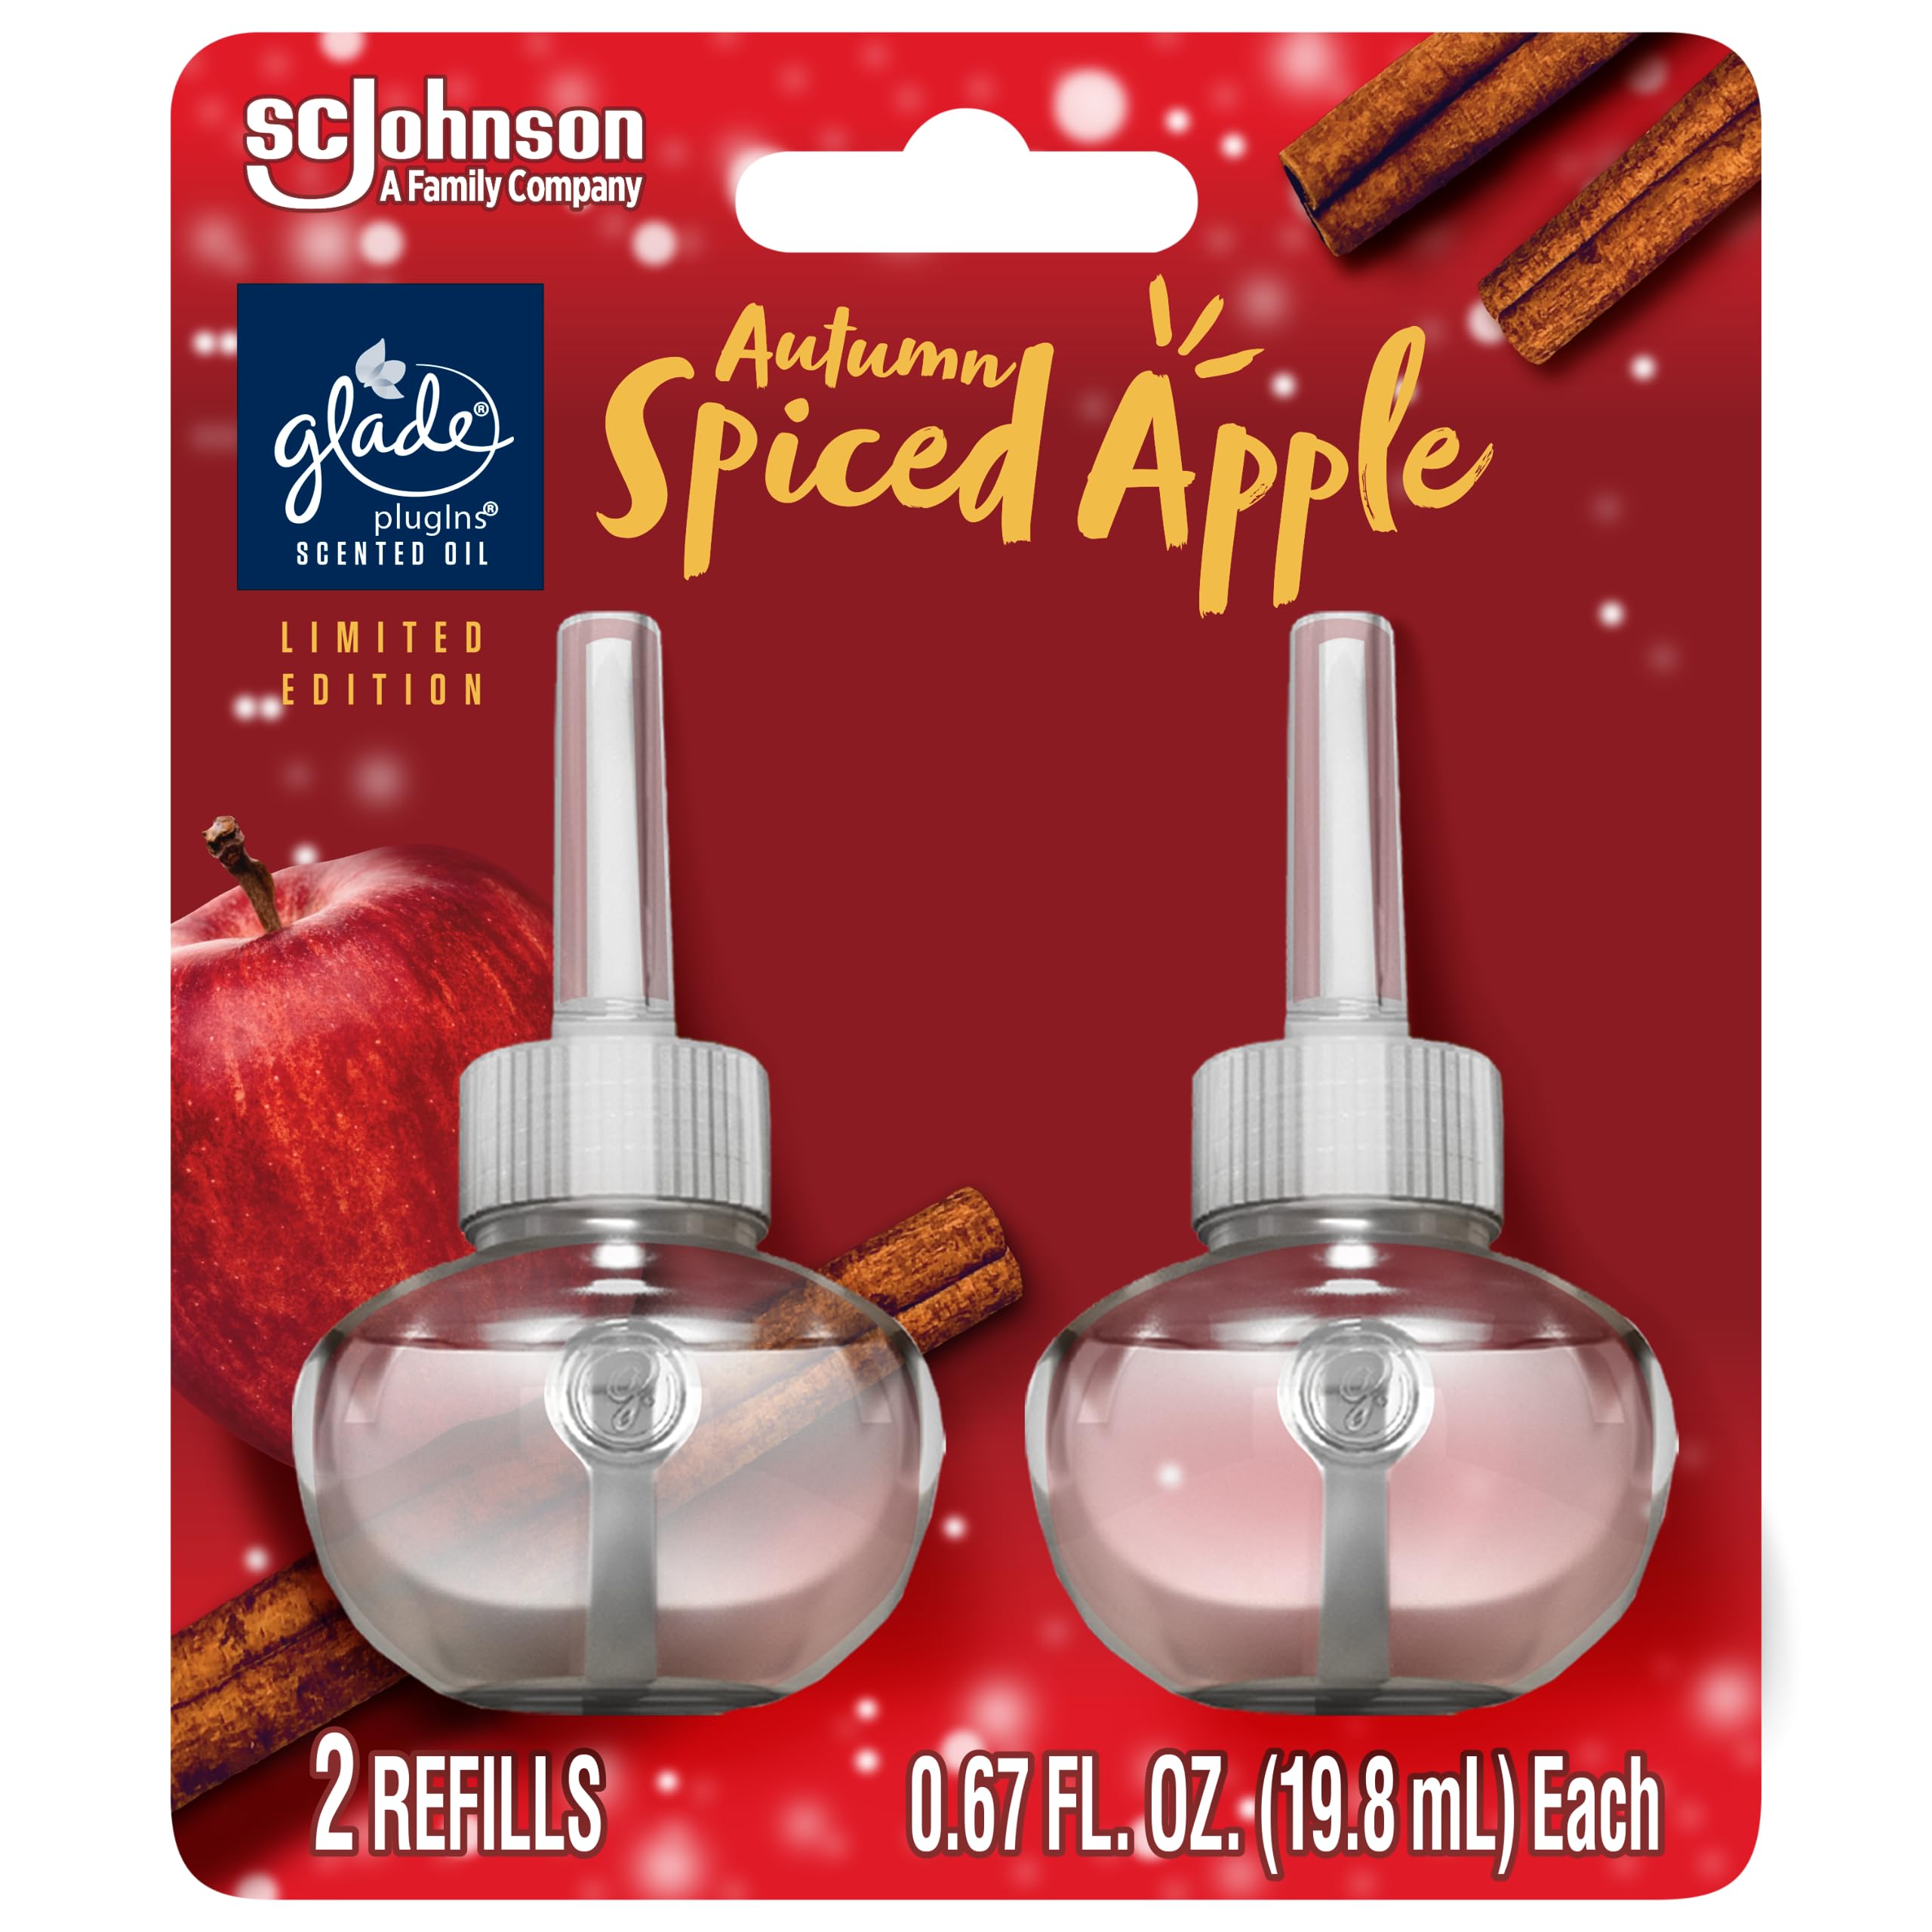 Glade PlugIns Refills Air Freshener, Scented and Essential Oils for Home and Bathroom, Autumn Spiced Apple, 1.34 Fl Oz, 2 Count